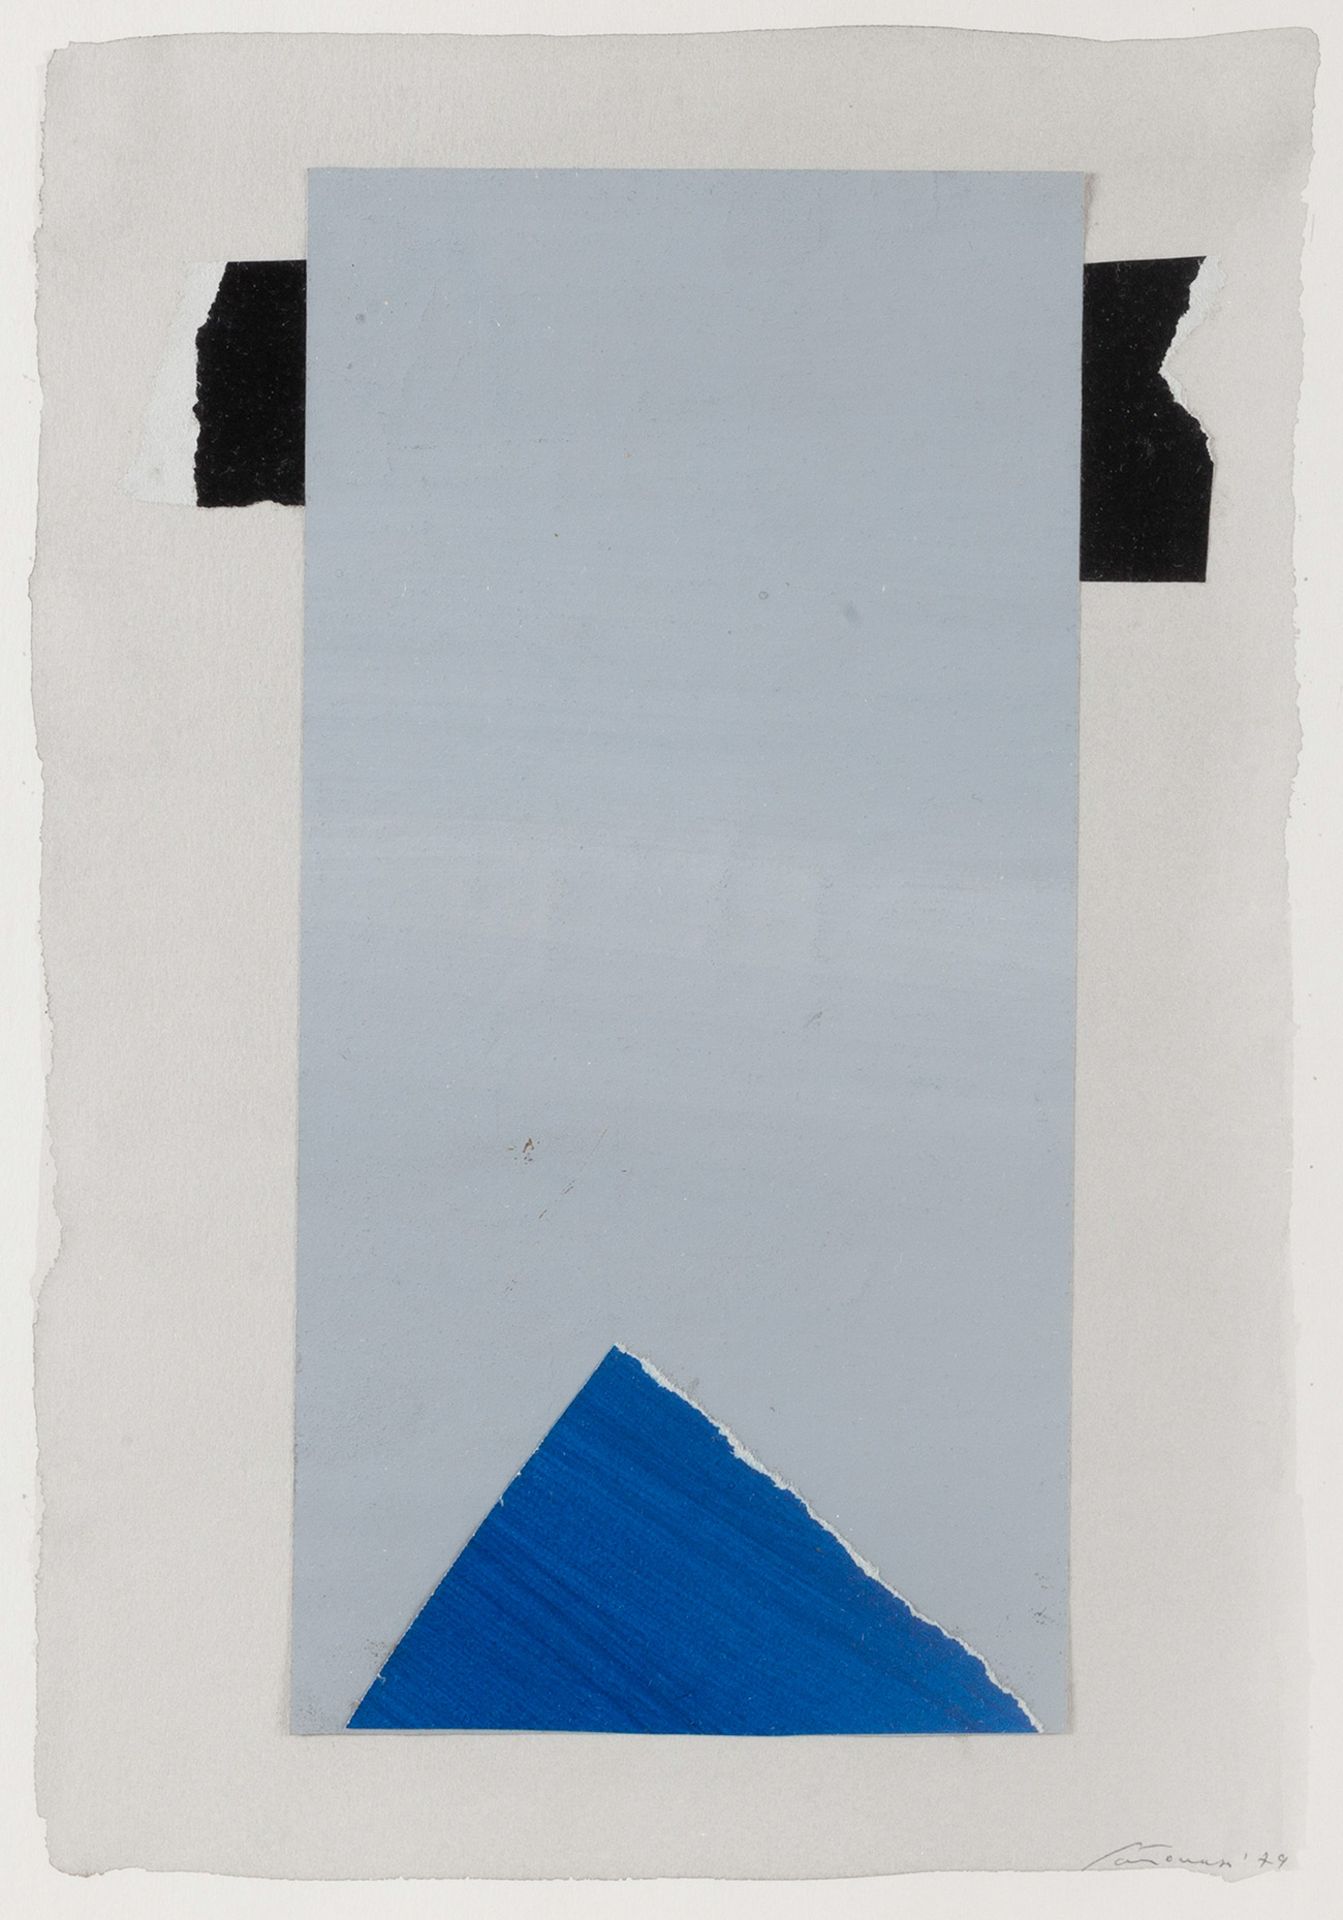 GIUSEPPE SANTOMASO (Italy, 1907 - 1990).Untitled, 1979.Mixed media and collage on card.Signed and